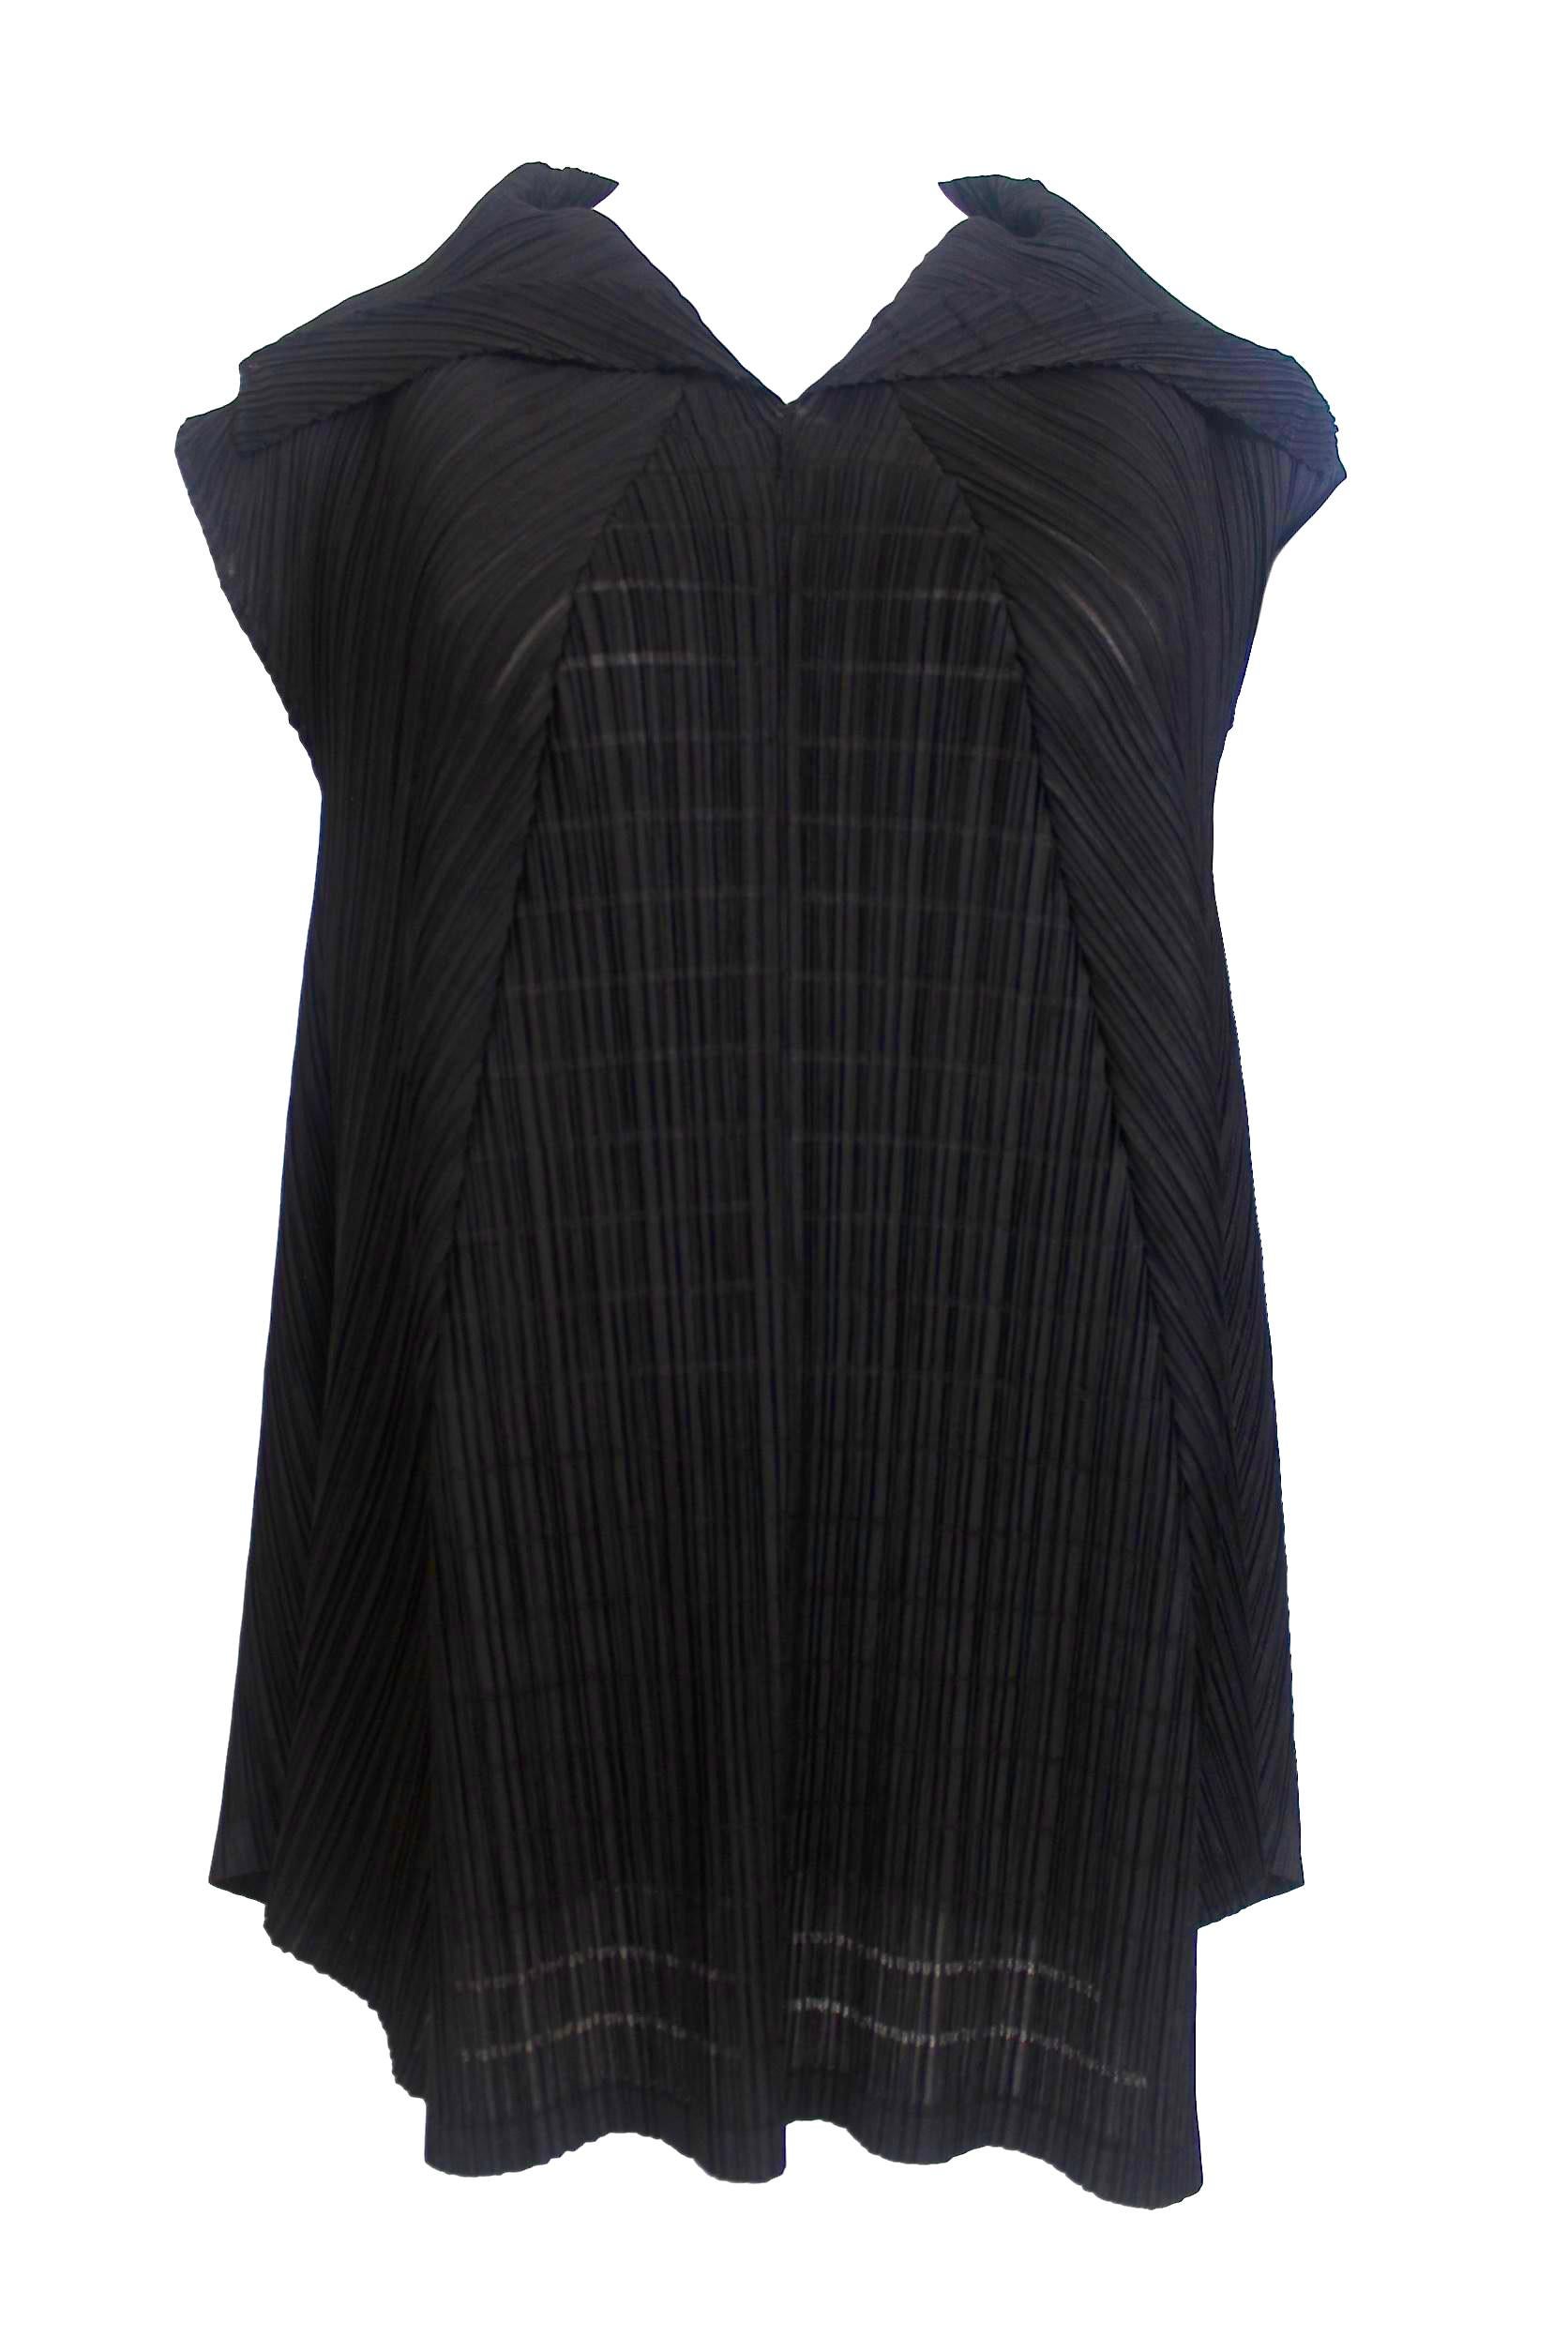 Issey Miyake 
1990s Pleats Please Top
Labelled Size 3